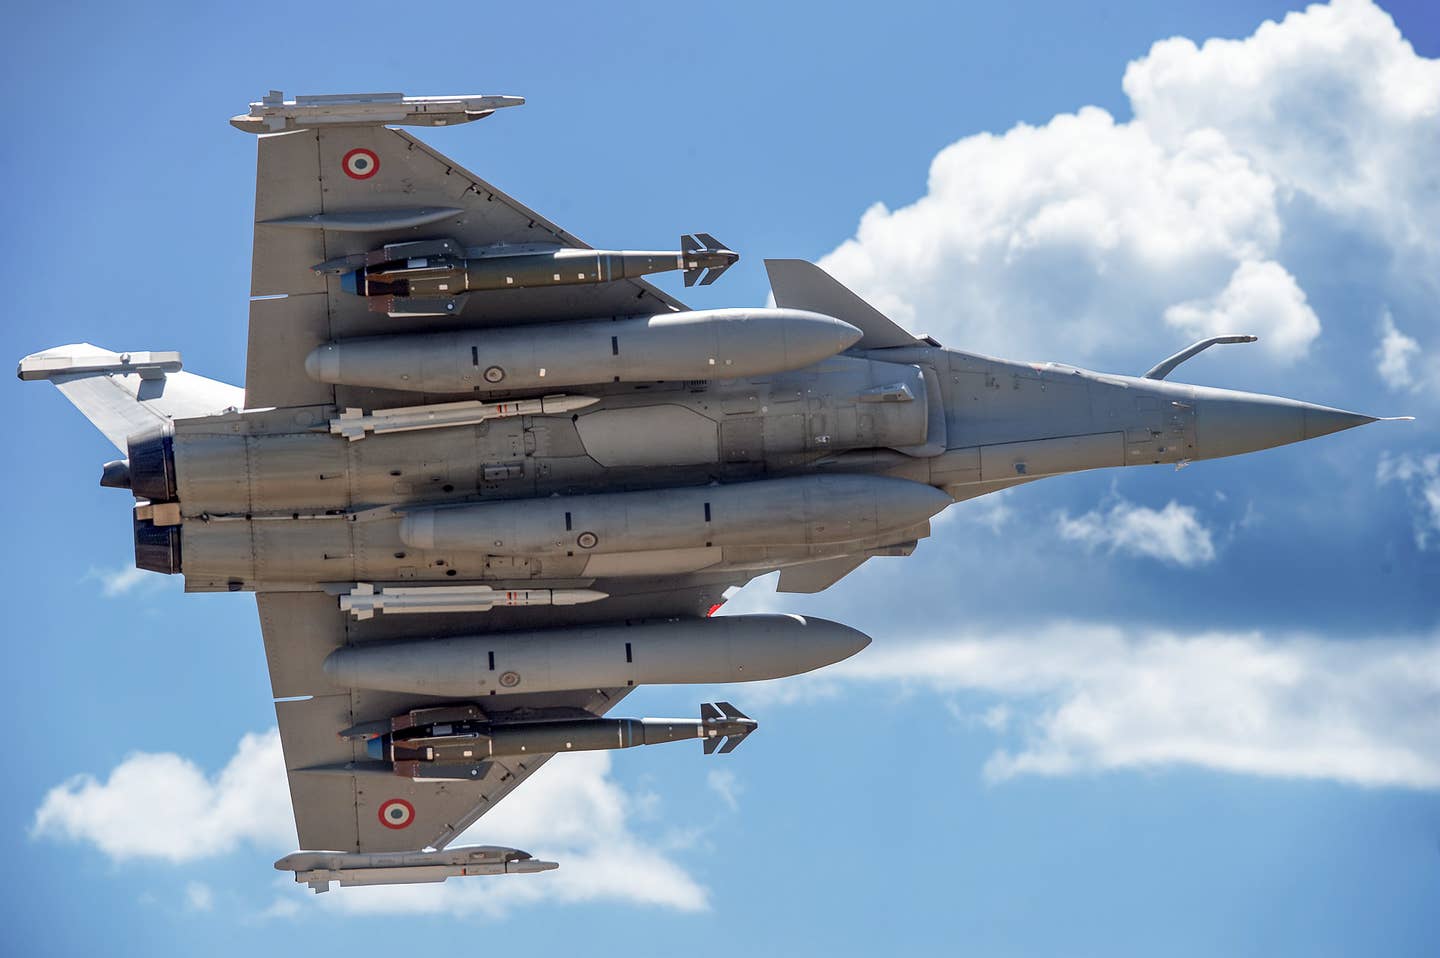 A French Rafale jet carrying a mixed air-to-air and air-to-ground weapons load. <em>Dassault Aviation</em>